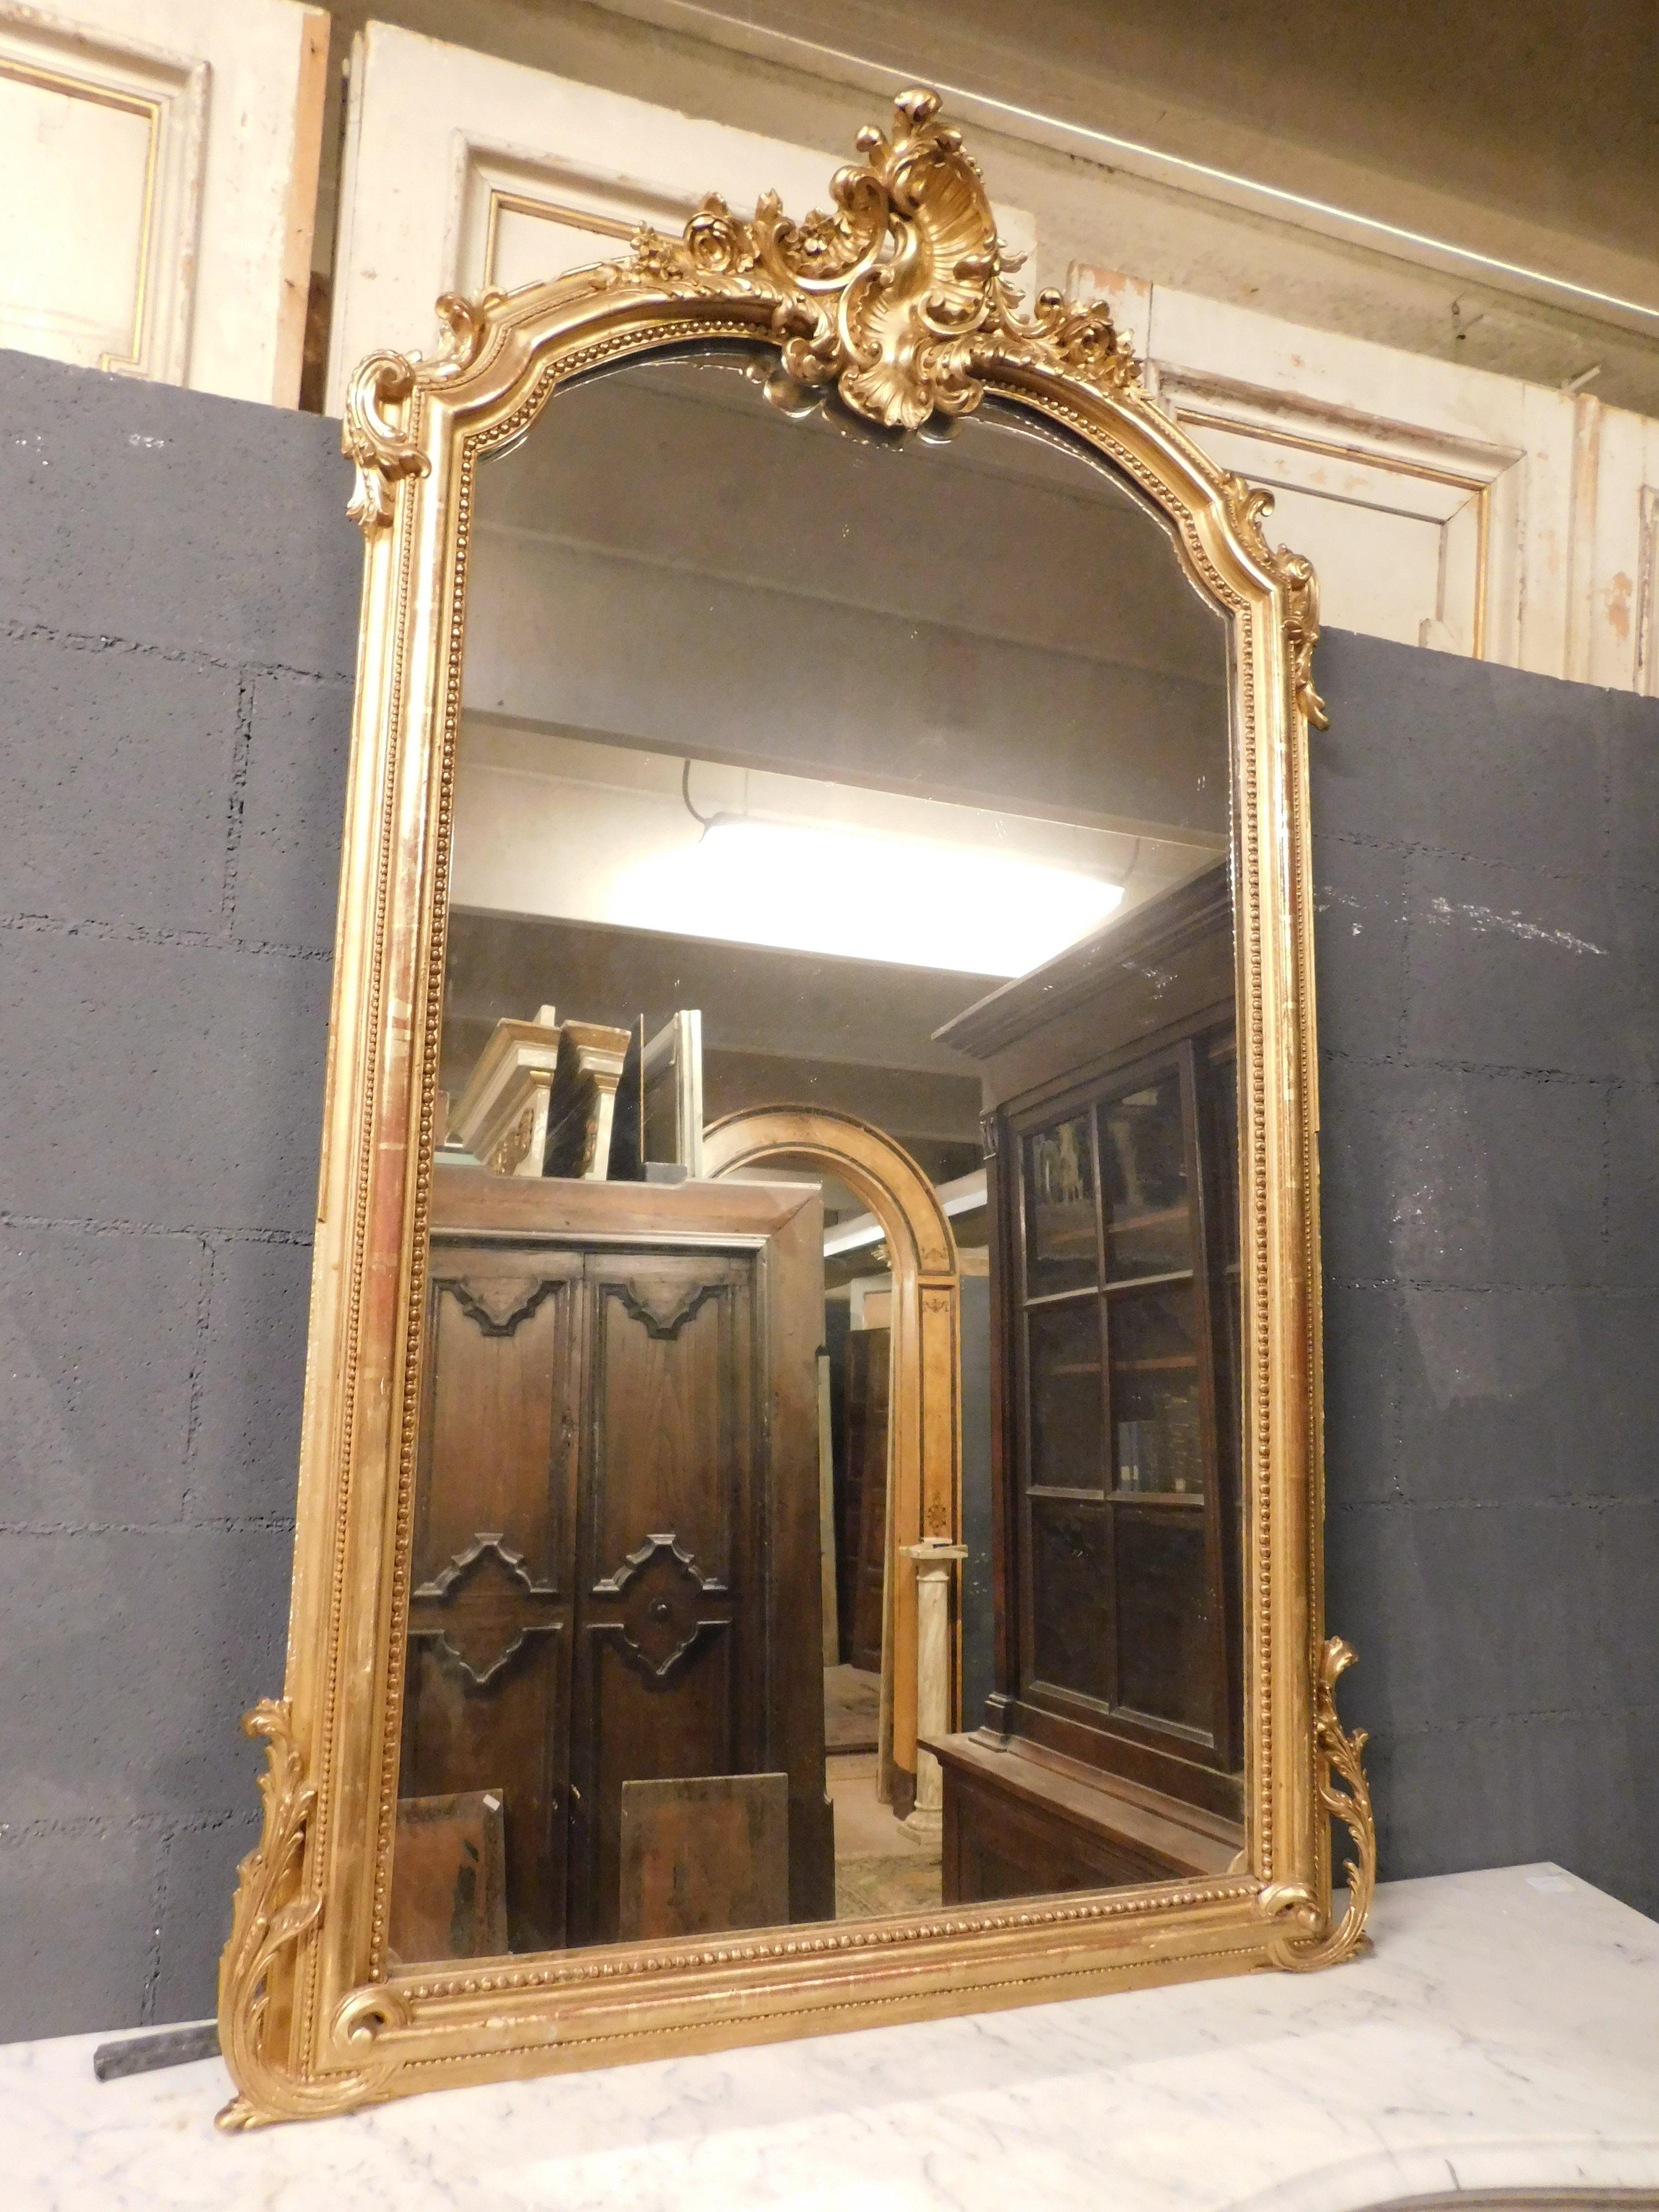 Ancient mirror in gilded wood with richly carved frieze, at the top it has a beautiful sculpture and frills on the sides, built in the 19th century in France, it was born placed above a fireplace, now adaptable also as an entrance mirror or above a